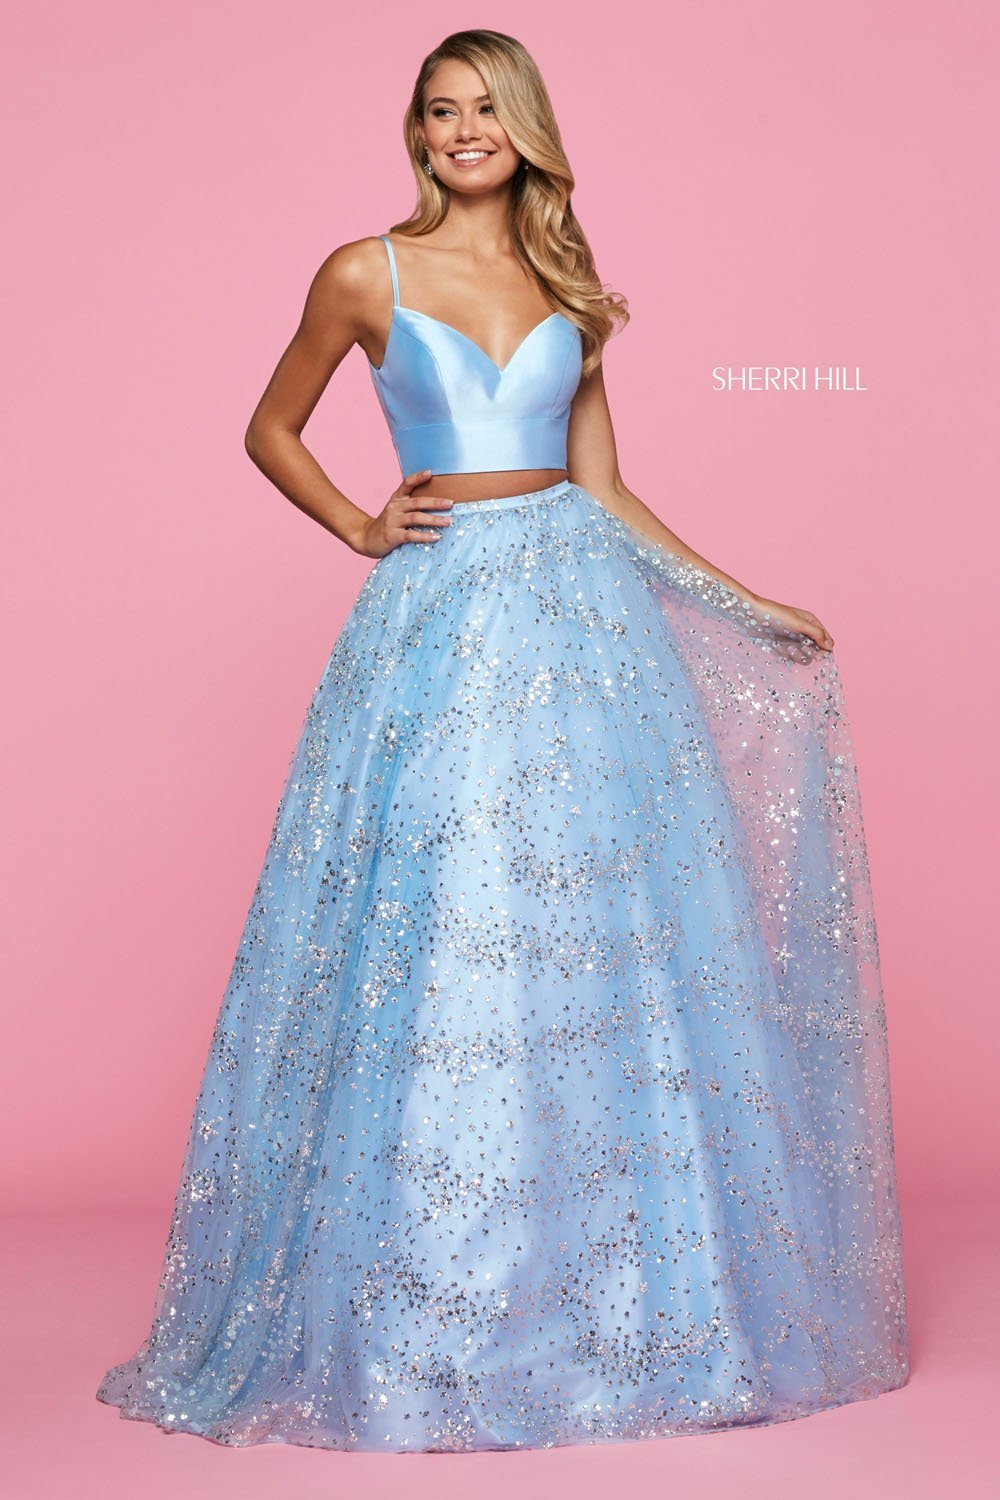 Sherri Hill 53326 dress images in these colors: Navy, Ivory, Light Blue.